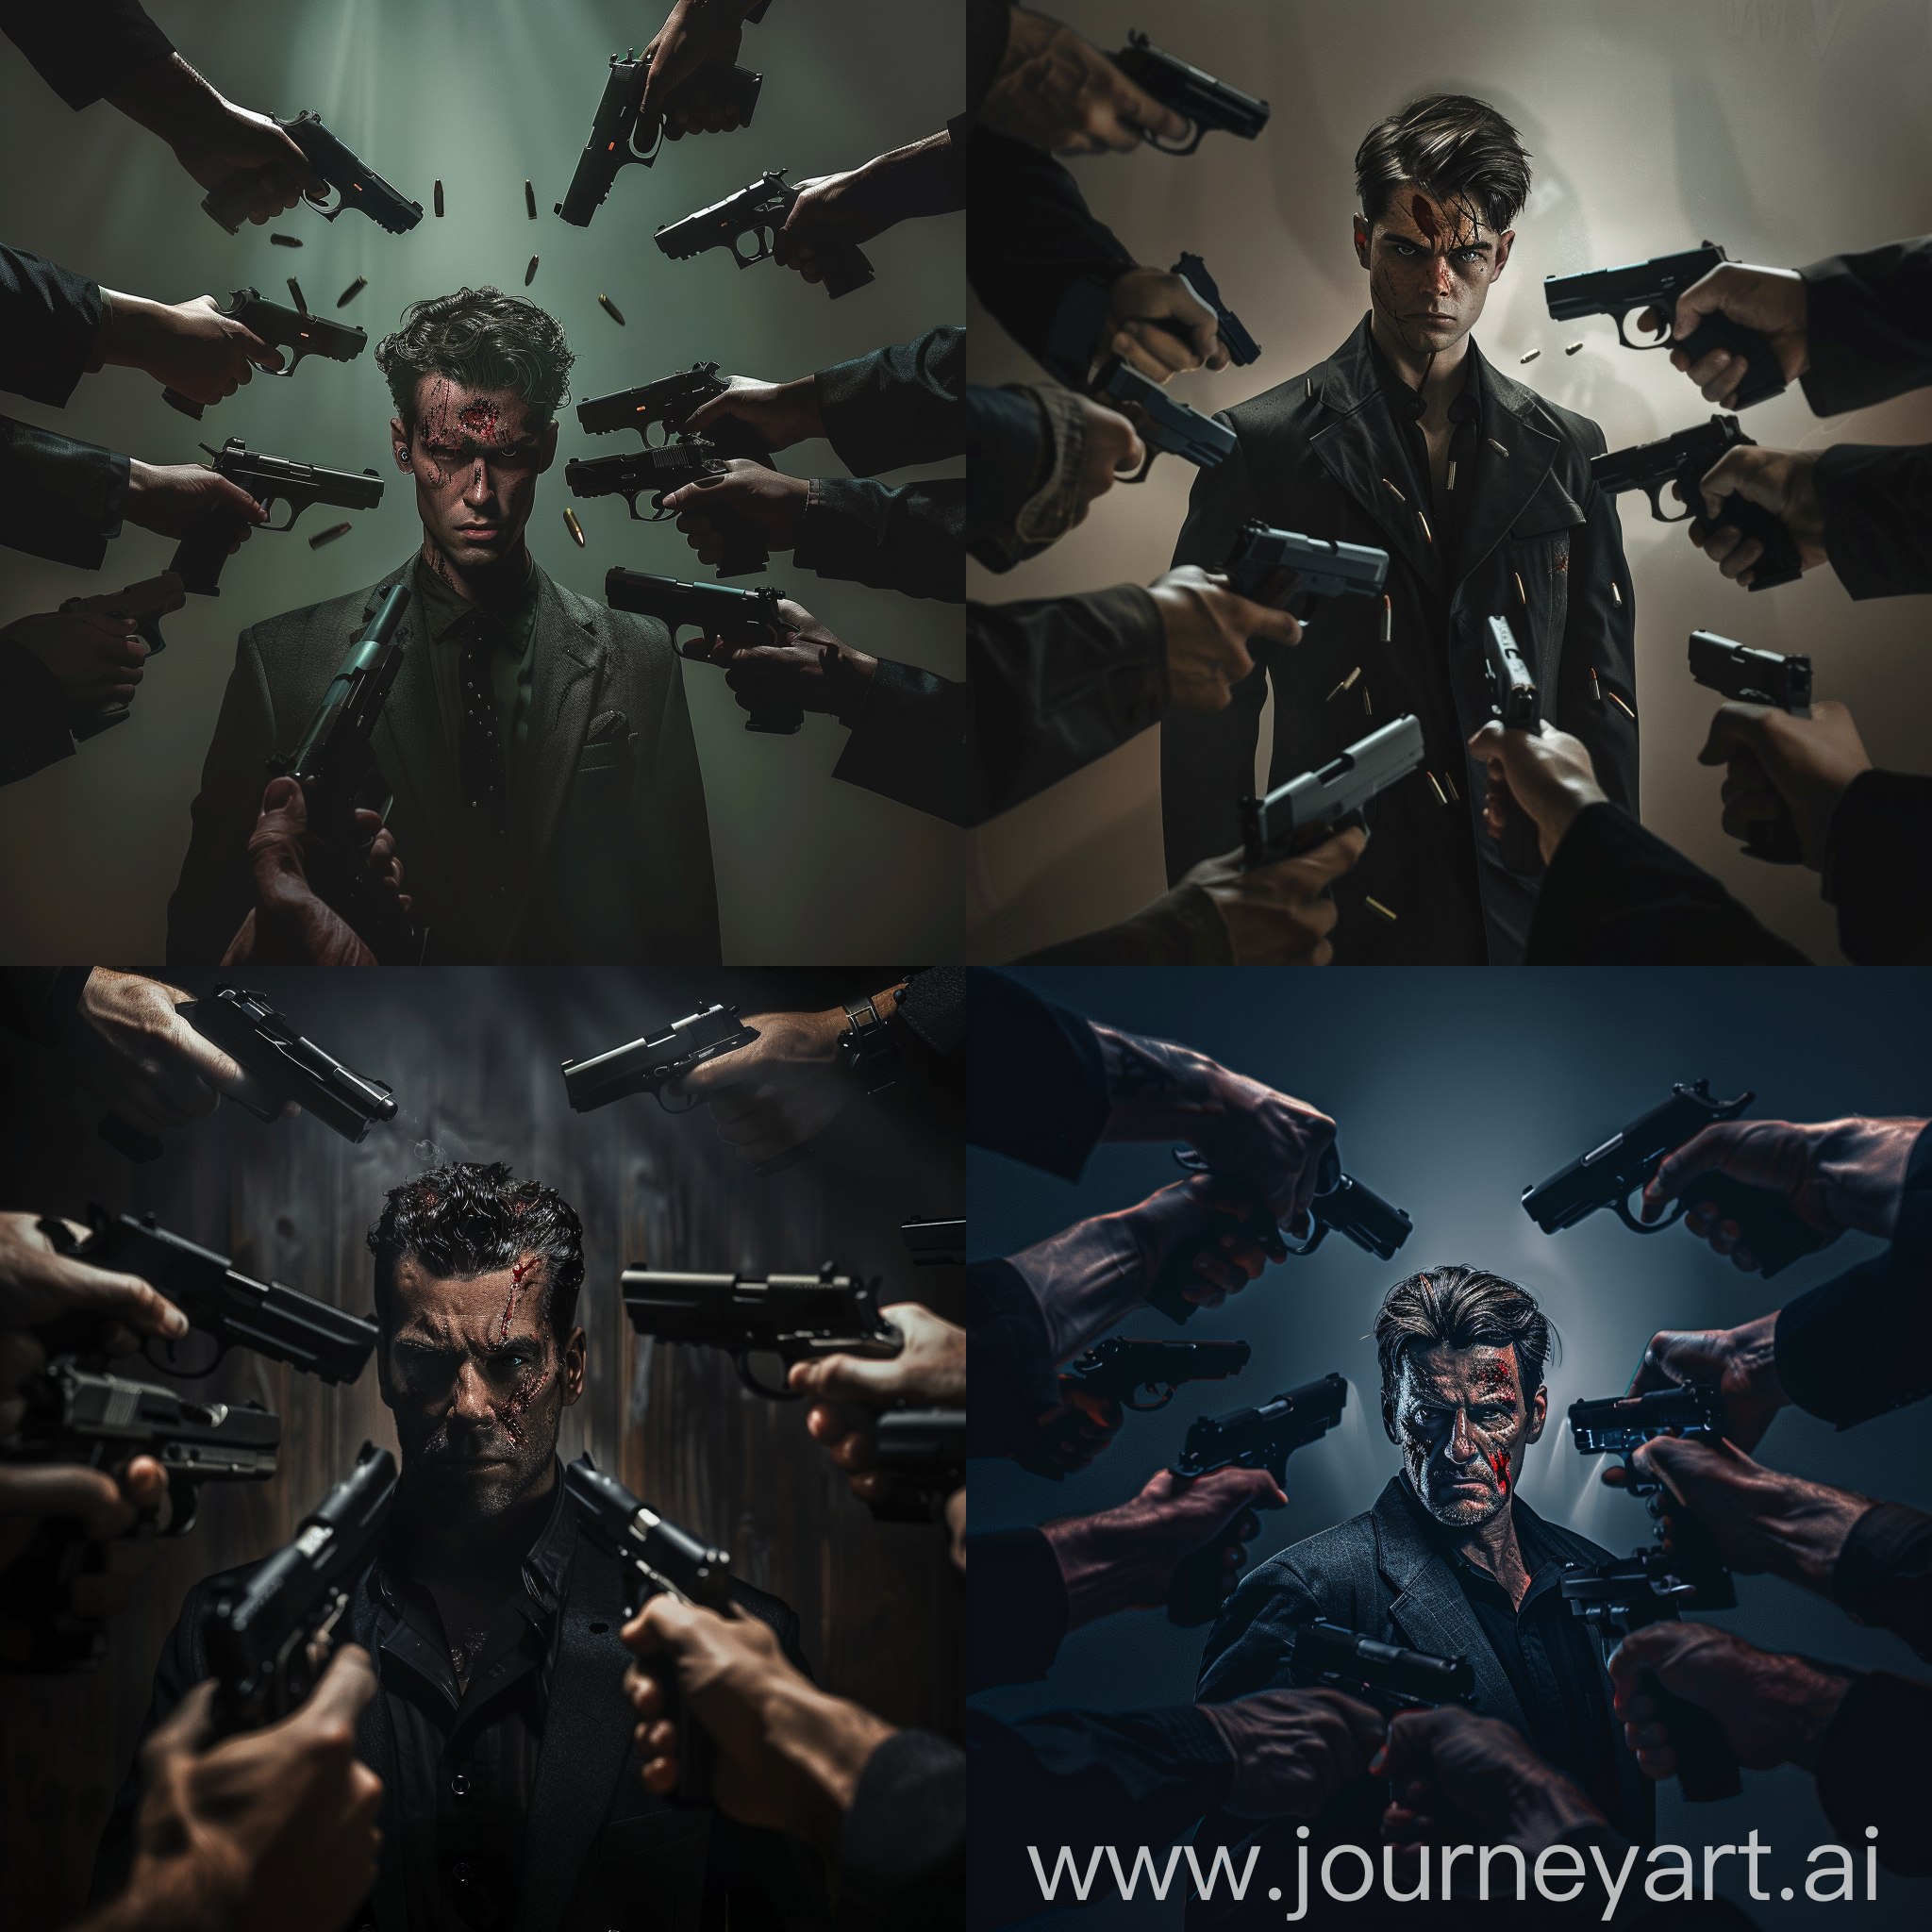 an bright image of a central male character caught in a high-stakes moment, surrounded by numerous arms stretching from the shadows, each holding a sleek, menacing firearm. The male character stands resilient, with a determined gaze that confronts the danger head-on. his face is marked by the trials he's faced – a streak of simulated blood running down one side, and his hair tousled. he wears a dark suit that speaks of a grim elegance. The background is dimly lit, with an emphasis on the hands and guns converging towards his, creating a sense of tension and impending action. Capture the mood with sharp contrasts and a focused light source to highlight the facial expression and the steel of the guns